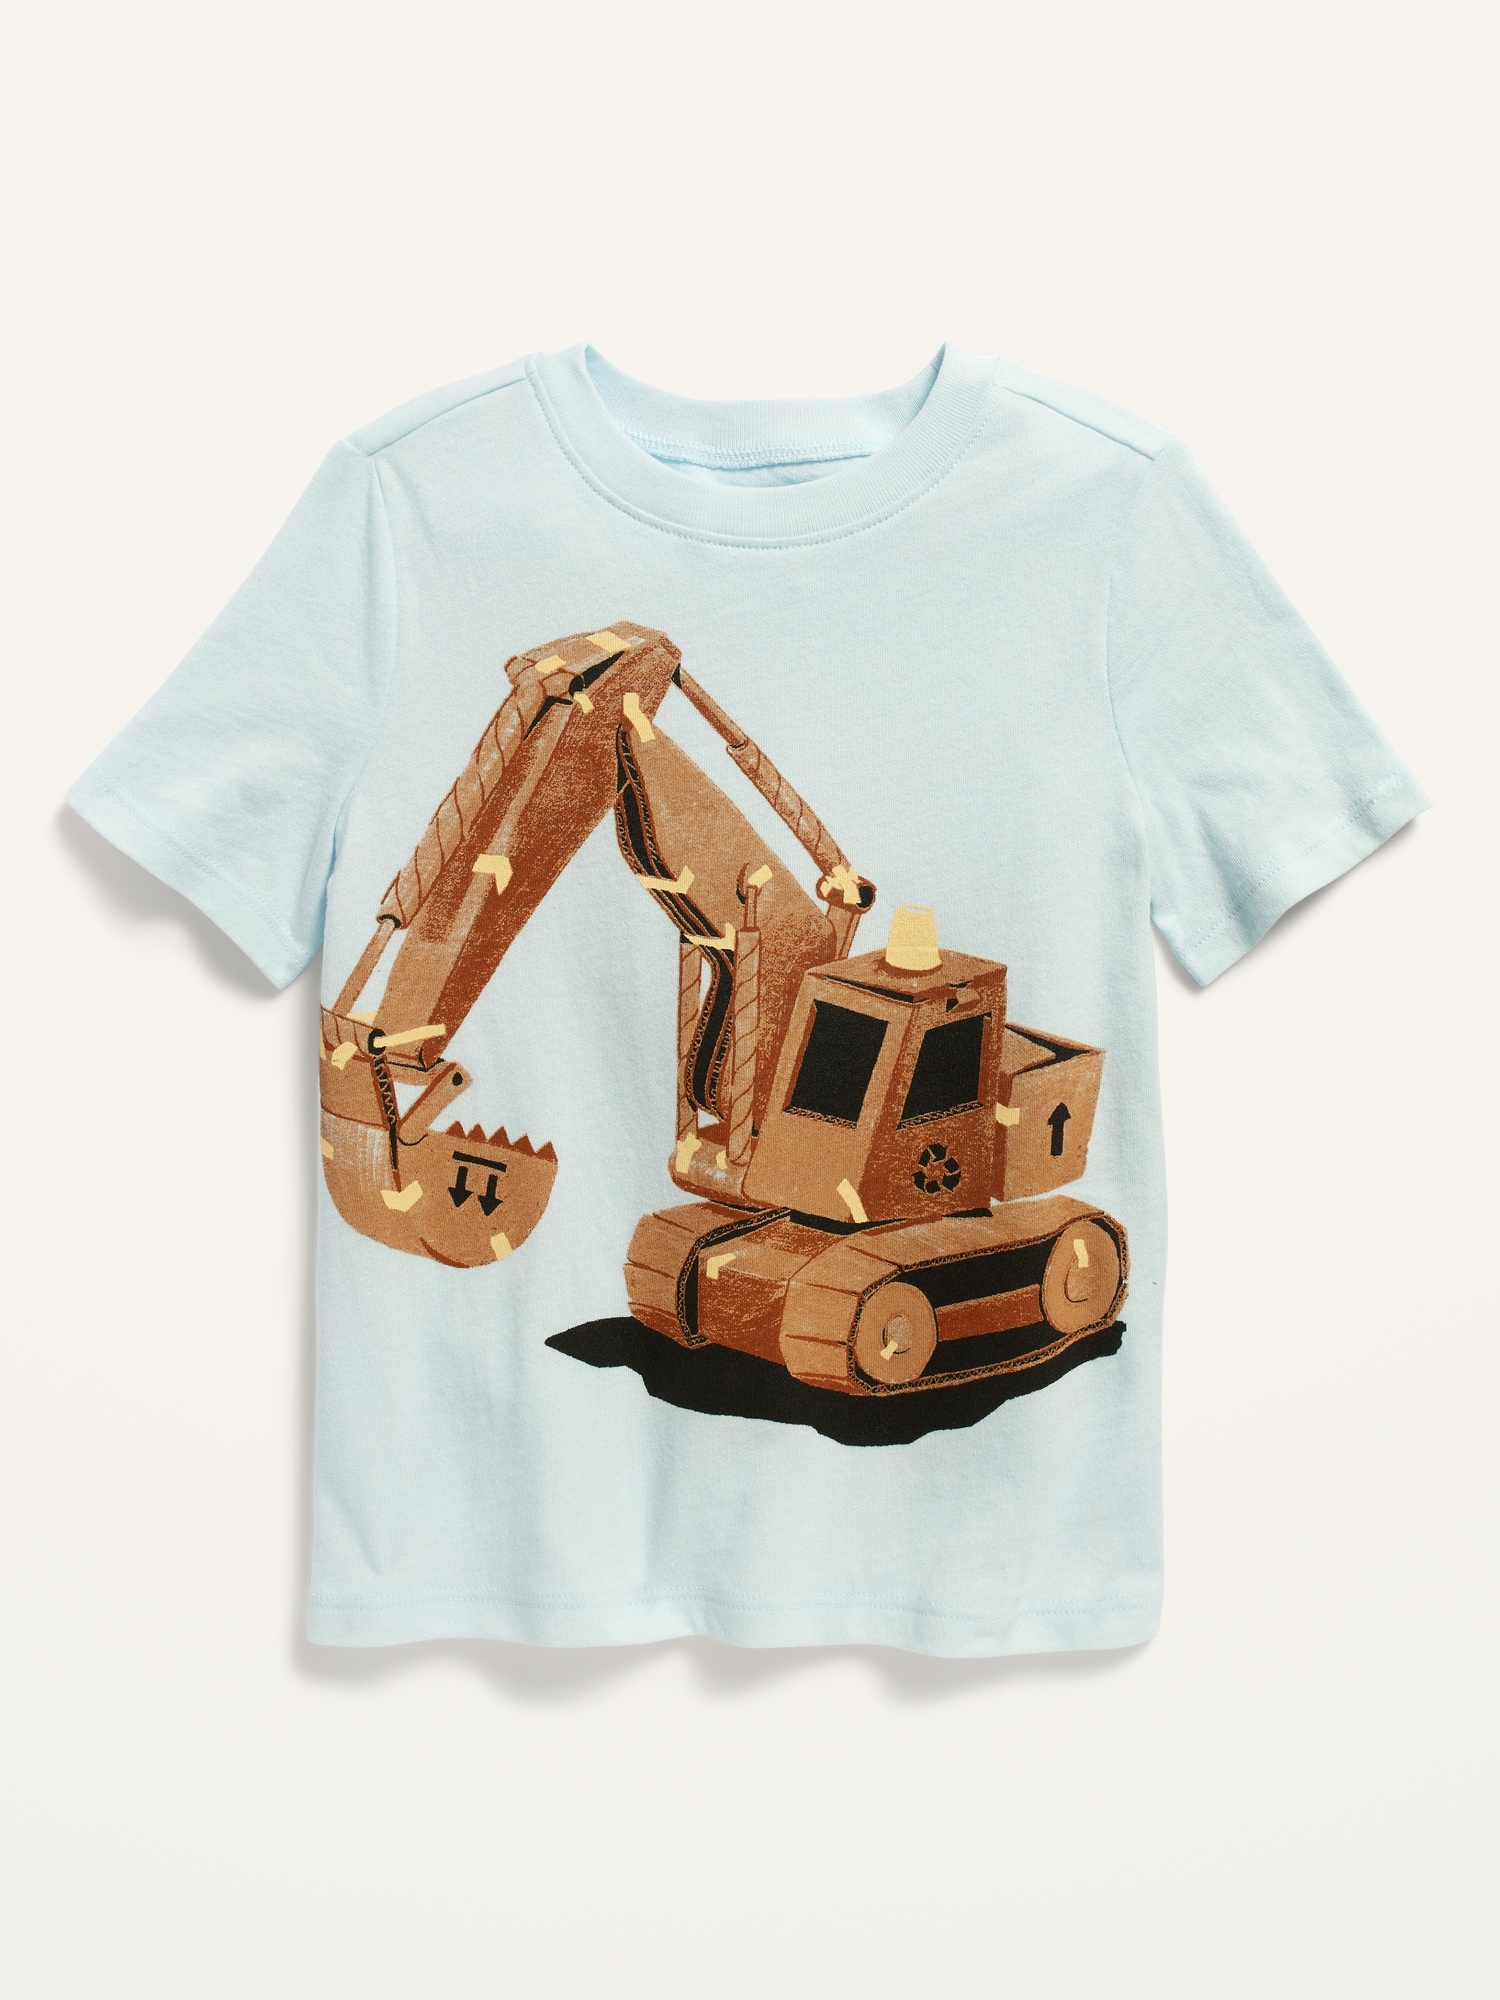 Short-Sleeve Graphic Tee for Toddler Boys